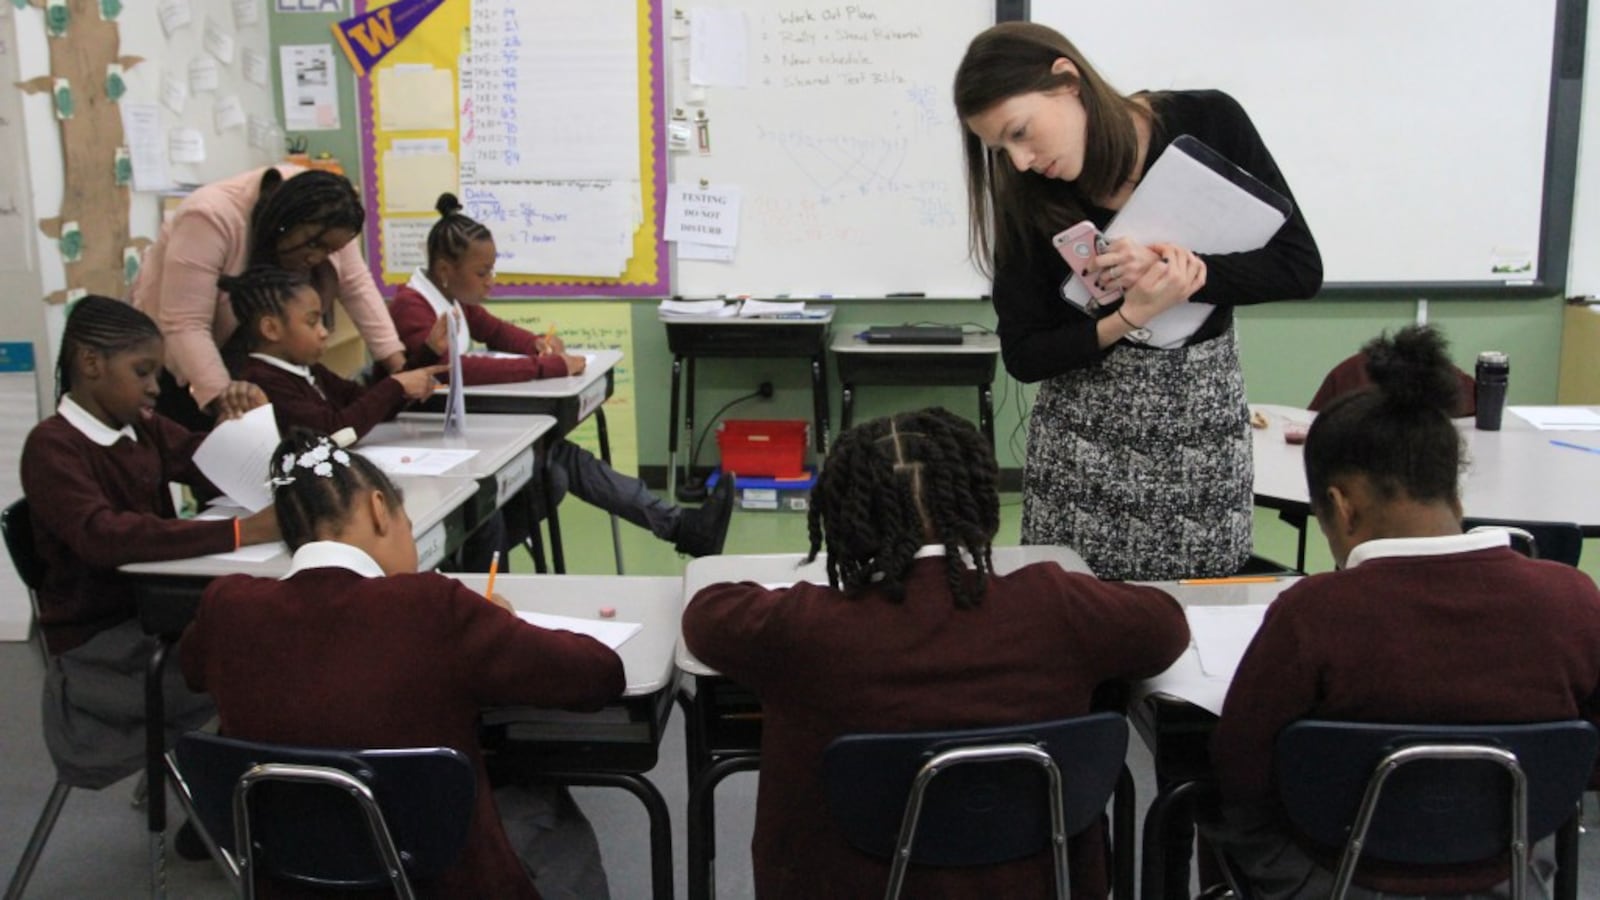 Erica Murphy, school director of Brownsville Ascend Lower Charter School, oversees students in a fourth-grade English class.